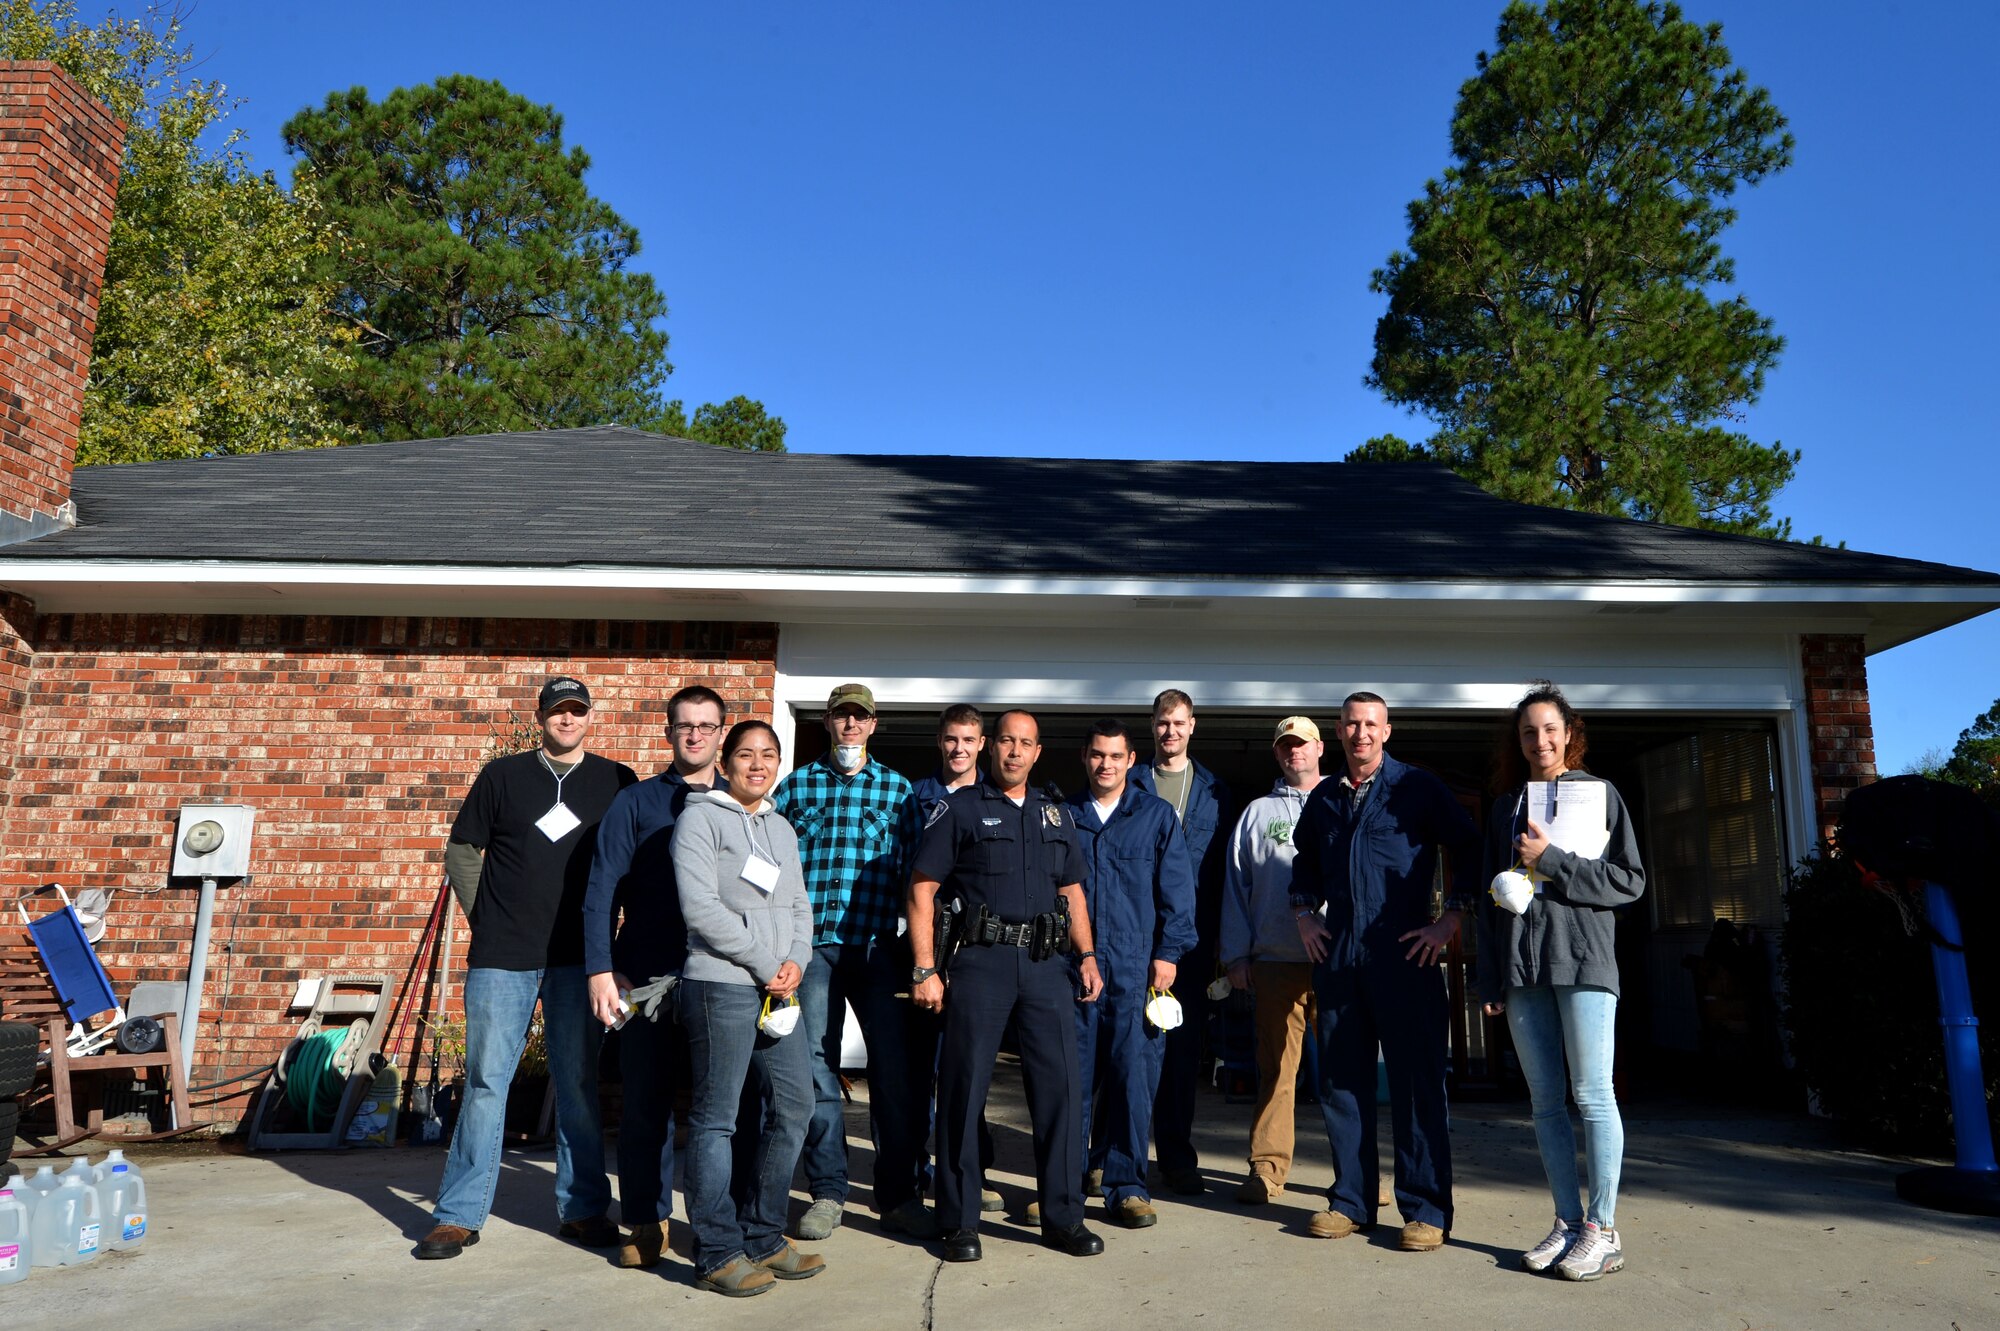 U.S. Air Force Airmen assigned to the 20th Fighter Wing stand with a Sumter County police officer and the homeowner of a residence affected by flood waters in Sumter, S.C., Oct. 17, 2015. Shaw Air Force Base, S.C. Airmen have spent the last several weeks volunteering with multiple organizations to assist with the disaster relief efforts in the Sumter area. (U.S. Air Force photo by Senior Airman Michael Cossaboom/Released)